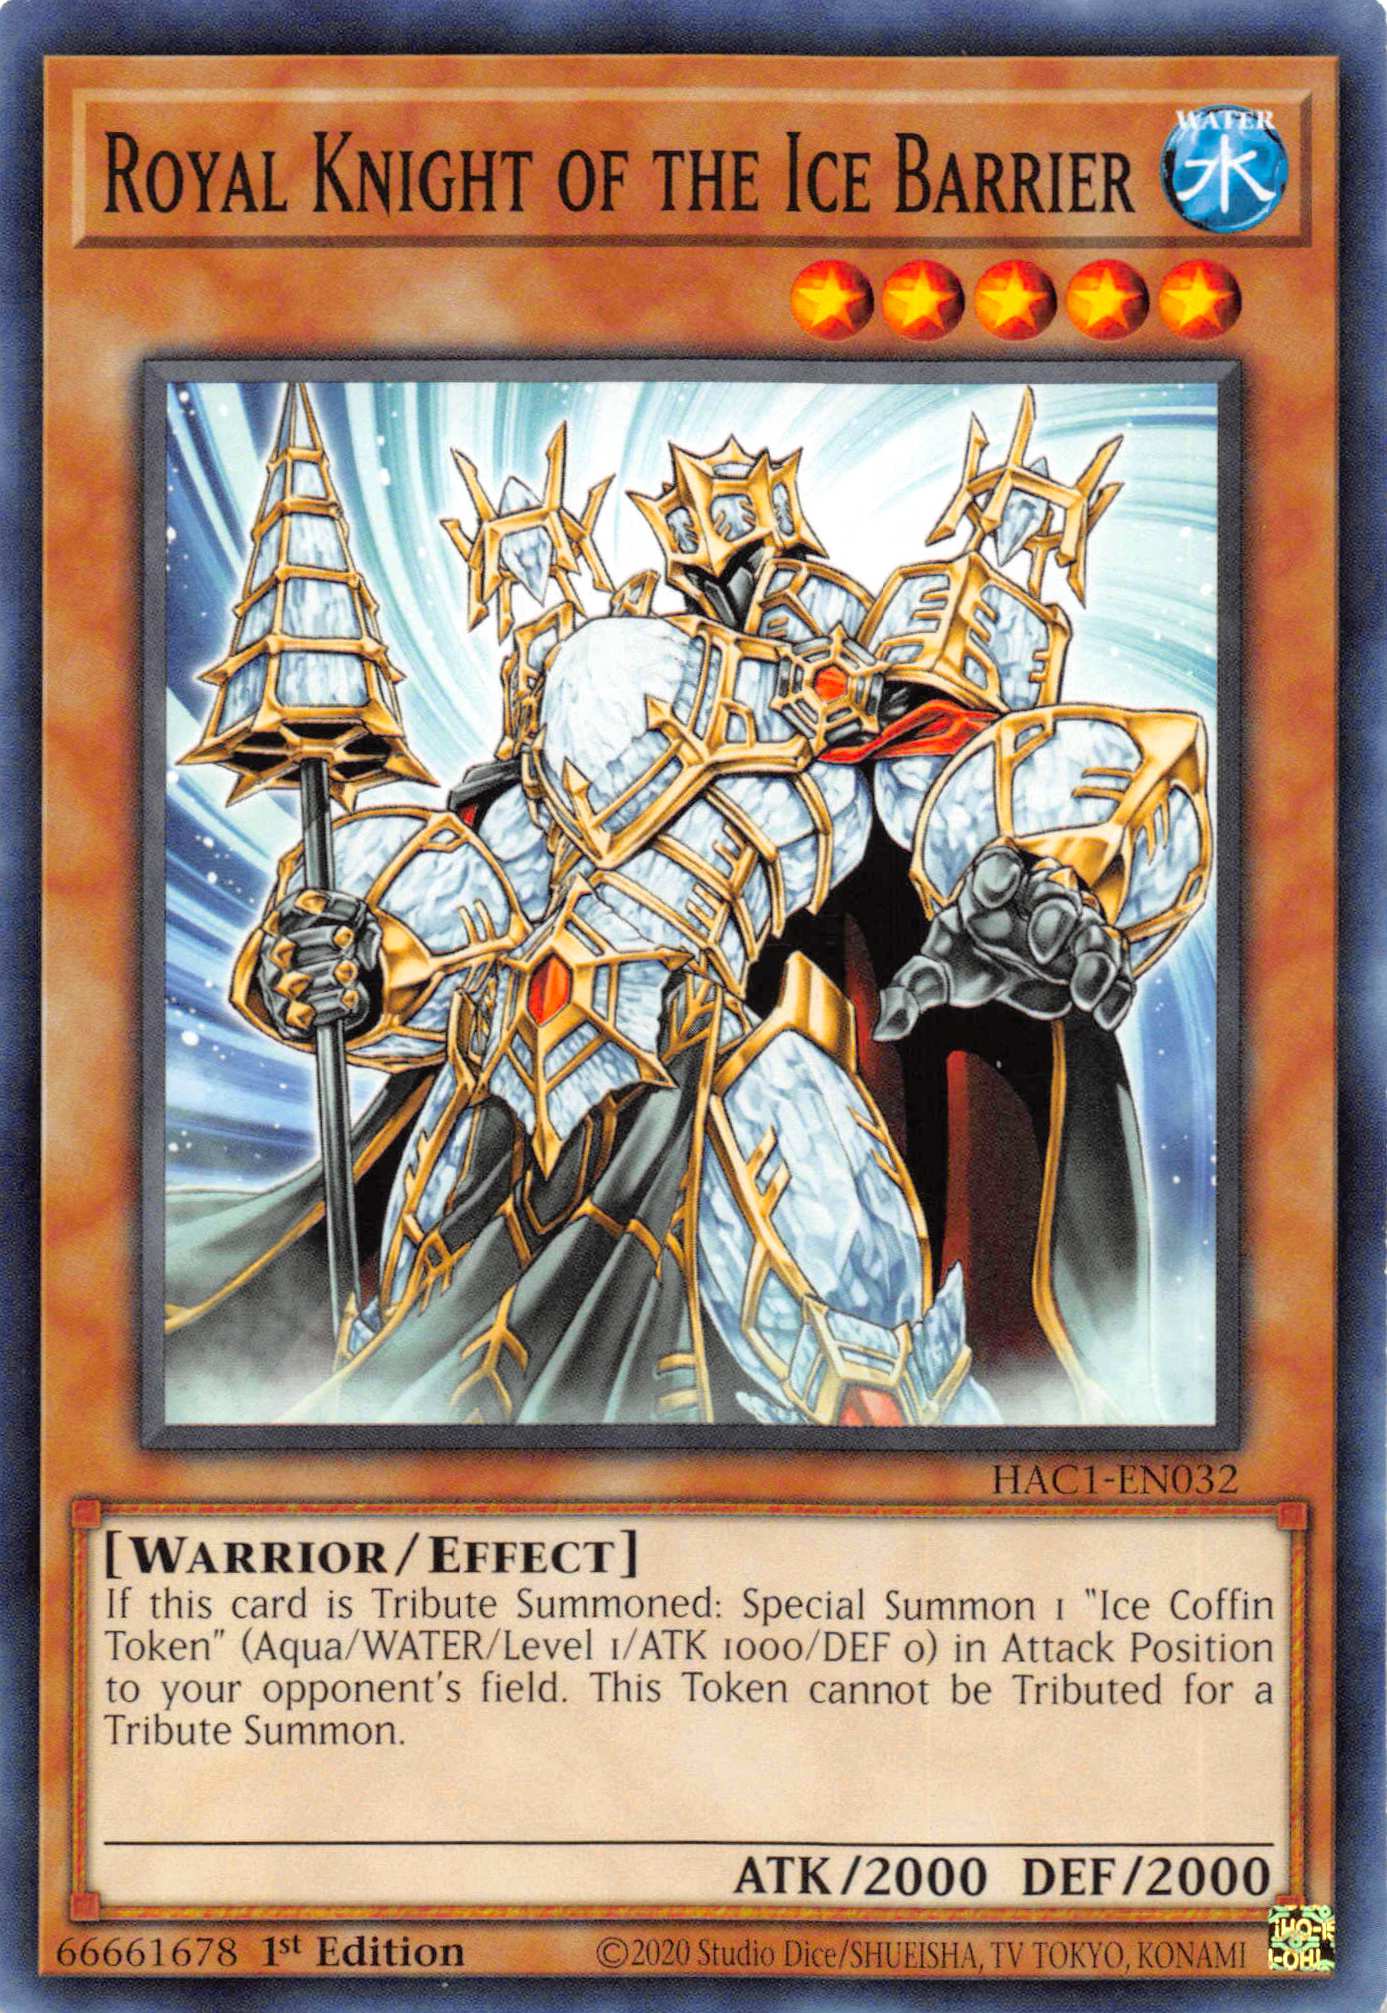 Royal Knight of the Ice Barrier [HAC1-EN032] Common | Galactic Gamez